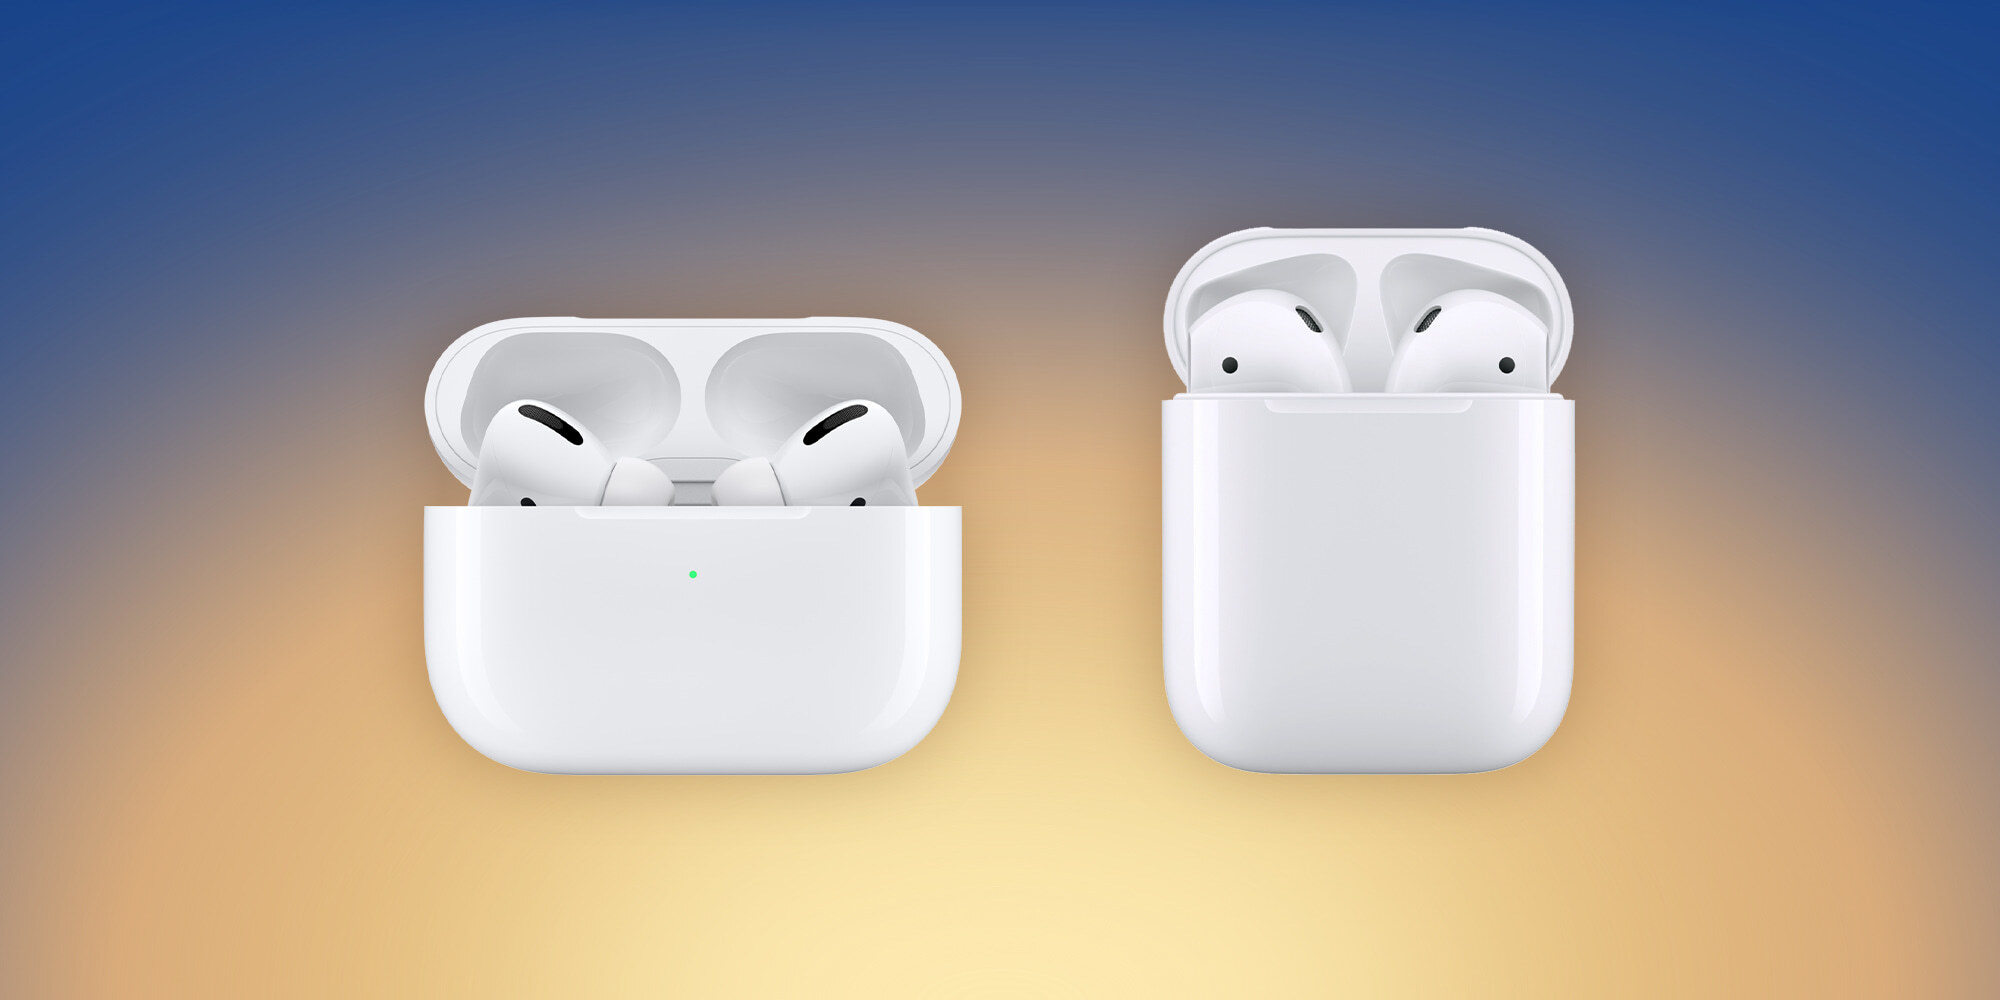 Apple AirPods Pro 2nd Generation With Better Audio Quality, Improved ANC,  UWB Launched: Price, Specifications